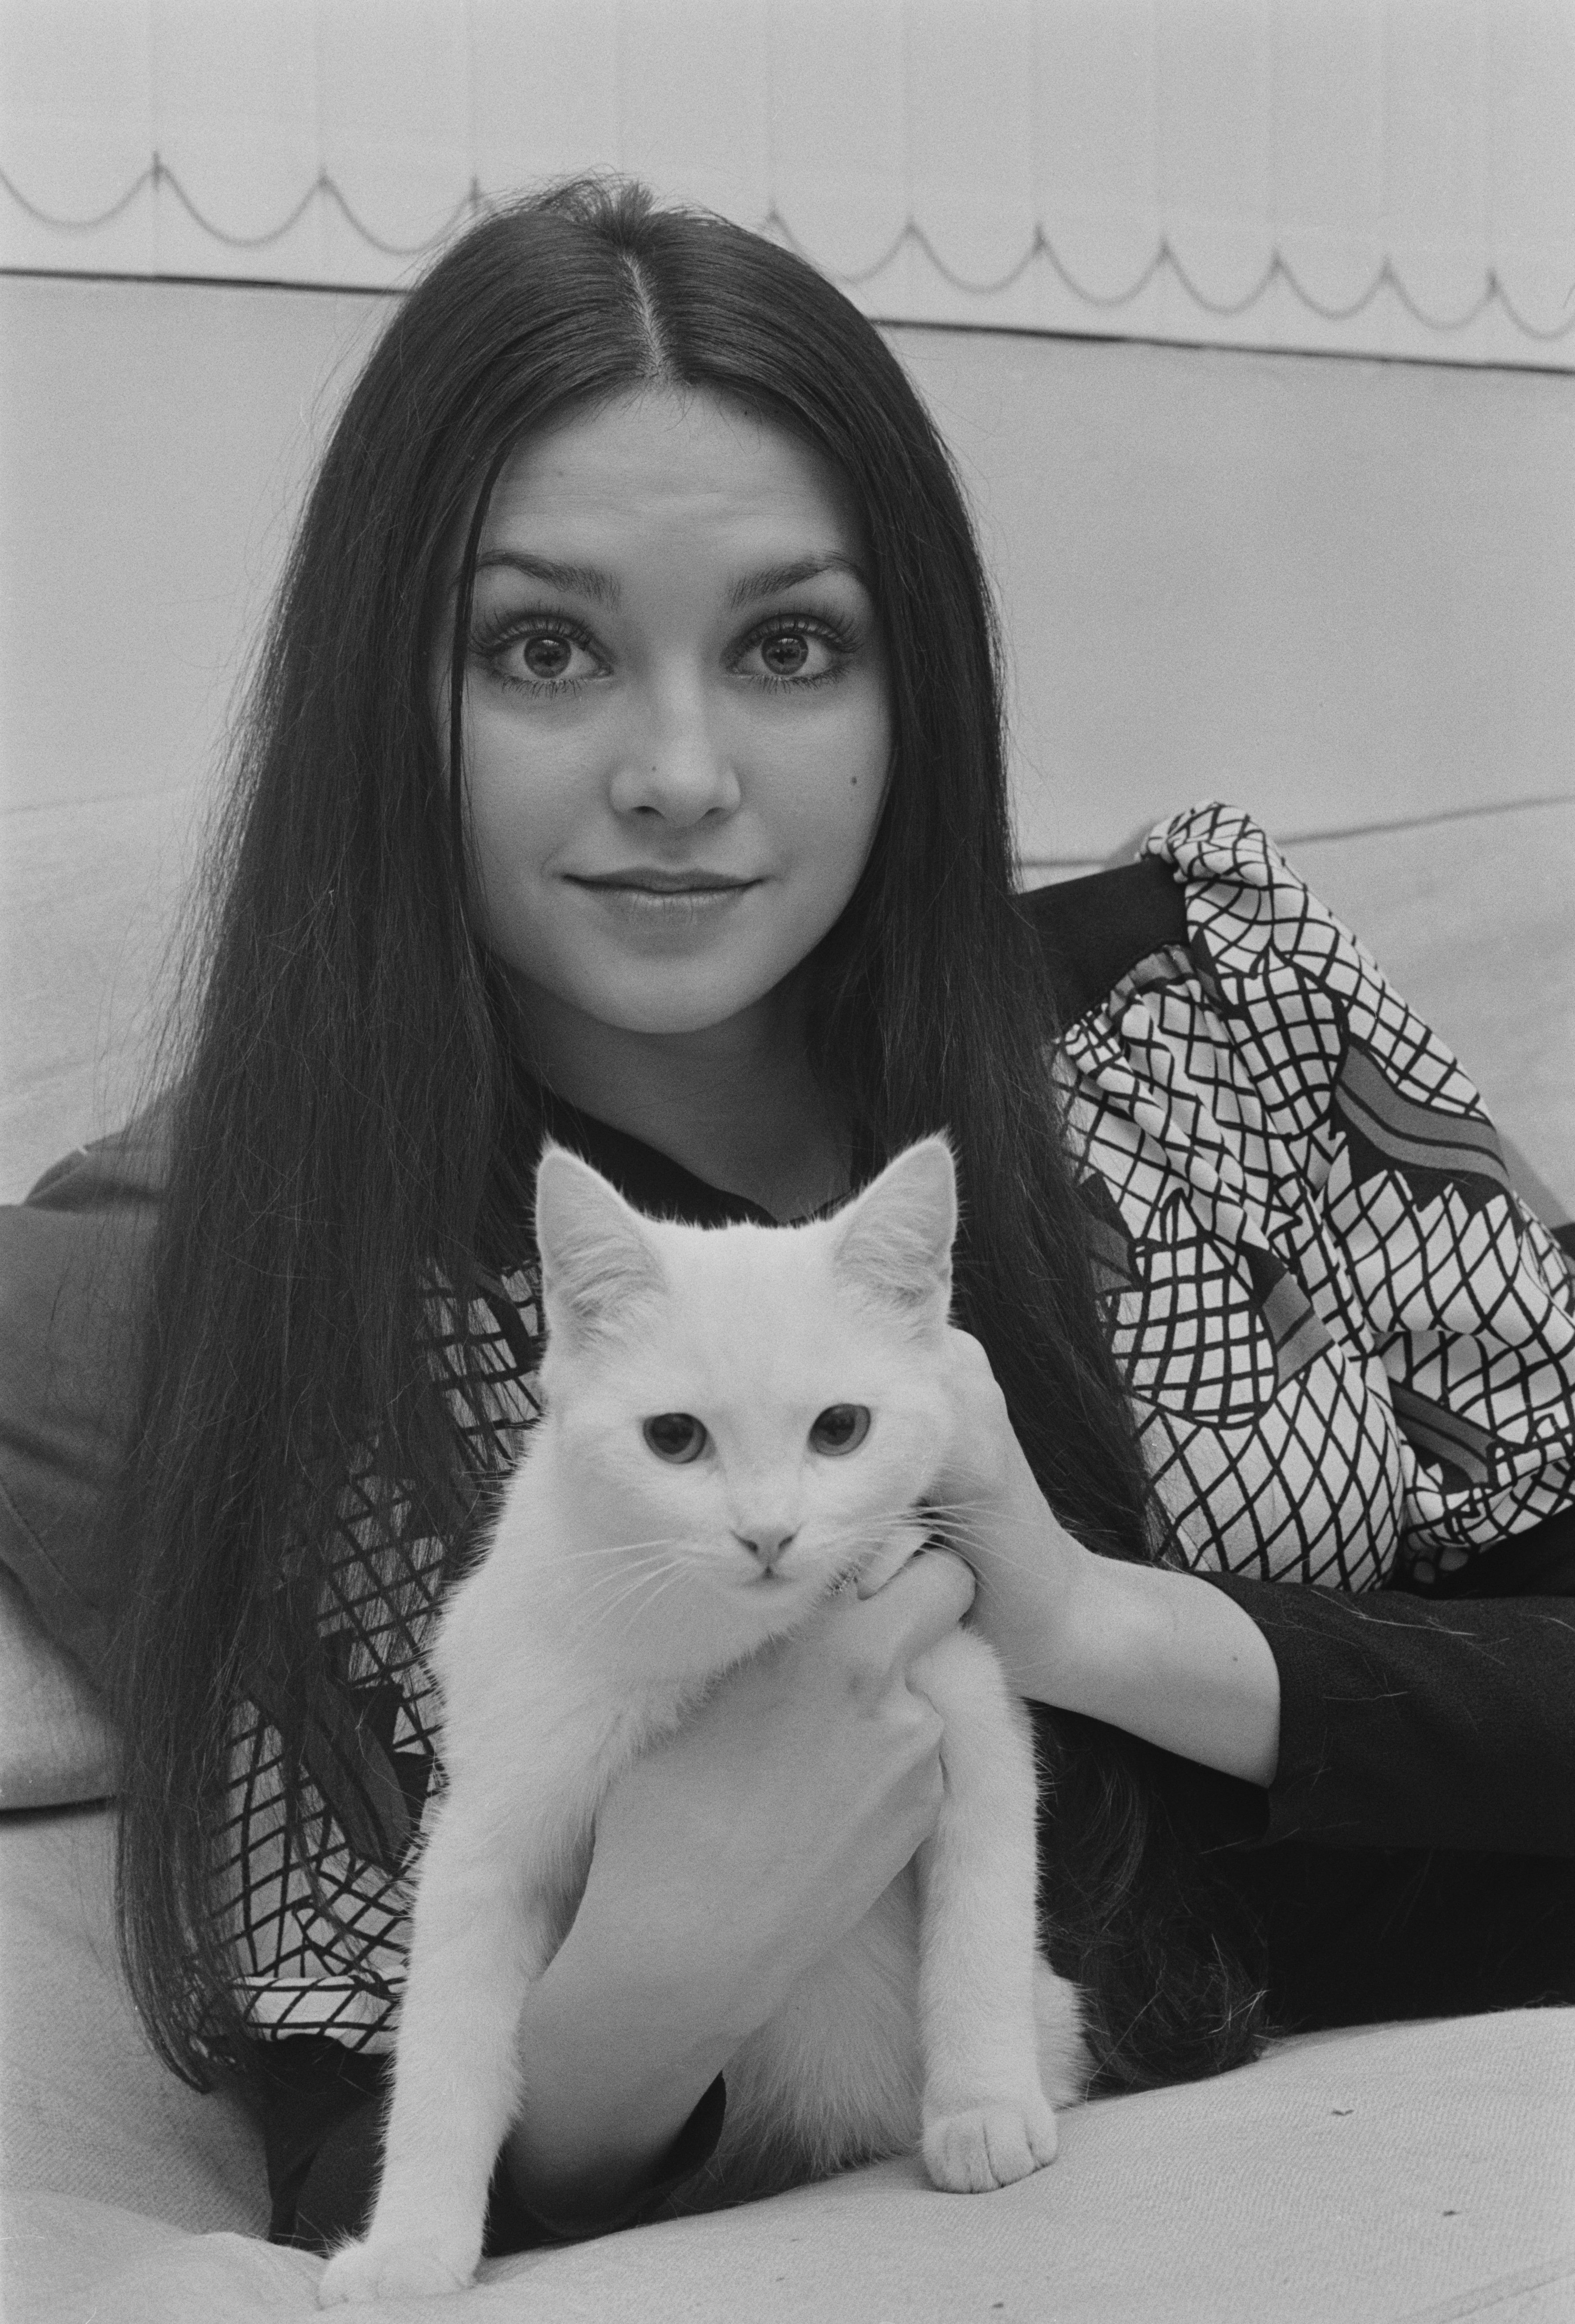 American actress Victoria Principal pictured holding a white cat during a visit to London on 3rd December 1970. | Source: Getty Images